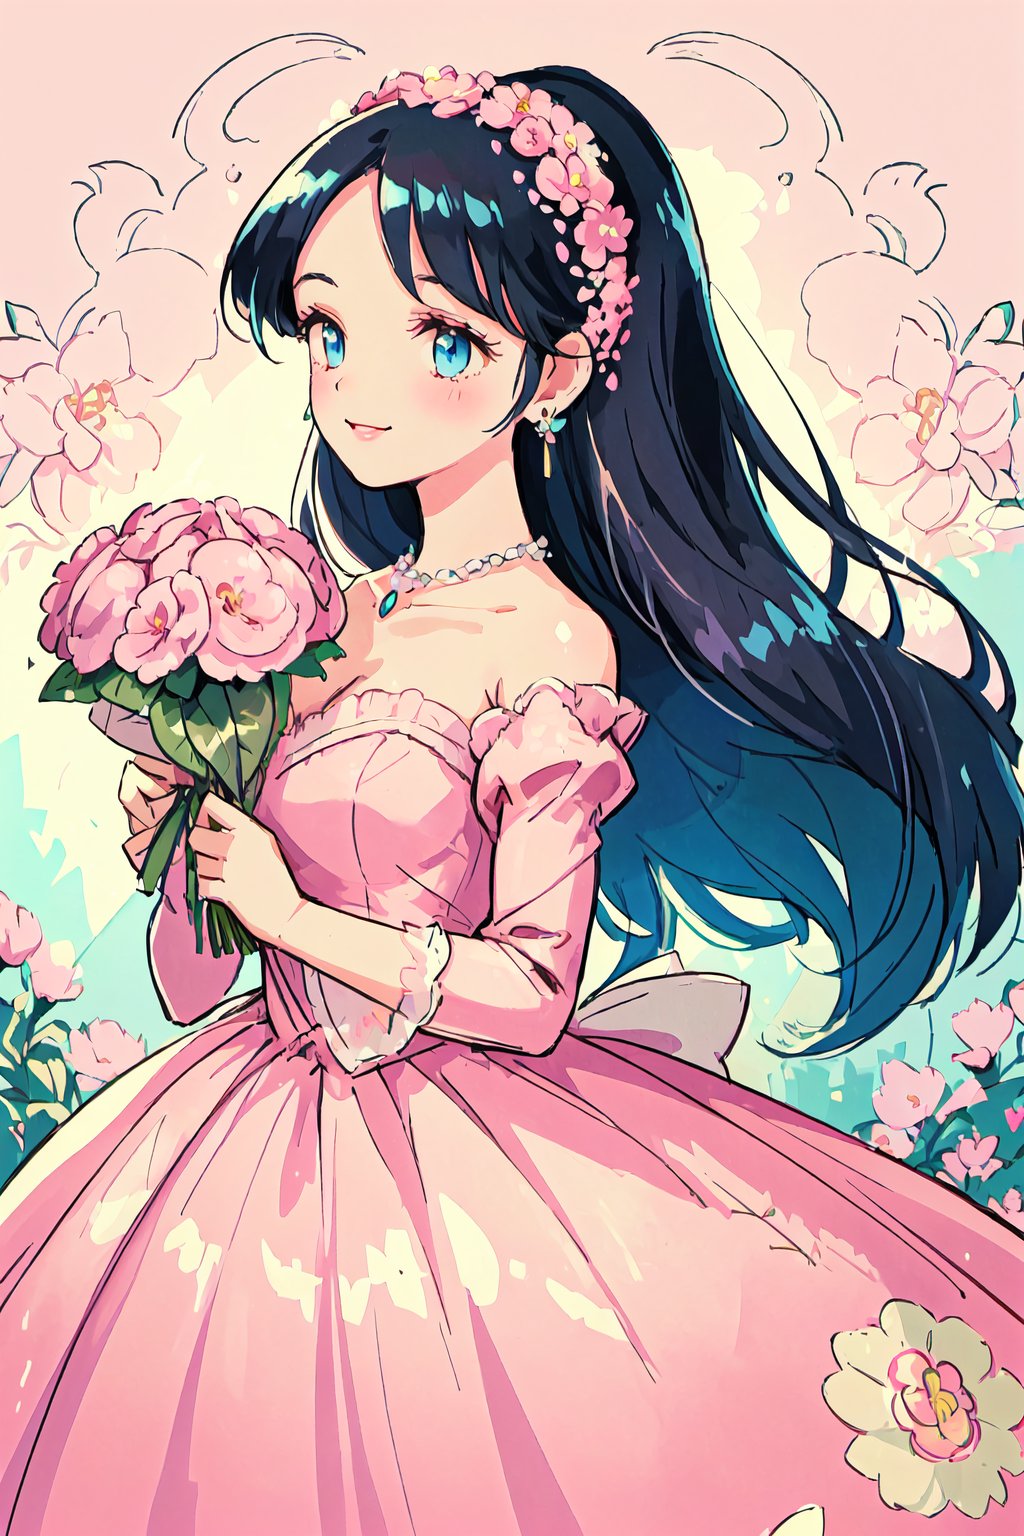 (best quality:1.2), (hyper detailed)
blue eyes, black hair, long hair,(parted bangs:1.2),(slicked back:0.8), smile,

Style - Retro Charm and Floral Delight

Background - Vintage Floral Patterns and Soft Pink Hues

Subject - Lovely and Cute Character with a Retro Flair

View - Playful Scene in a Nostalgic Garden

Appearance - Adorned in a Pink Retro Dress with Flower Accents

Outfit - Vintage Accessories, Flower-shaped Earrings

Pose - Holding a Bouquet of Flowers

Details - Flowing Gown with Celestial Accents

Effects - Soft Pink Glow and Retro Vibe

Description - Step into a world of "Retro Charm and Floral Delight" with this lovely character. Her appearance exudes a sense of nostalgia and elegance, as she stands amidst vintage floral patterns and soft pink hues. Adorned in a pink retro dress with delicate flower accents, she radiates a playful and enchanting aura. Her outfit is completed with vintage accessories, including flower-shaped earrings that add a touch of whimsy to her look. In a graceful pose, she holds a bouquet of flowers, creating a timeless and heartwarming scene. The soft pink glow surrounding her adds to the retro vibe, transporting you to a bygone era. With her captivating charm and floral elegance, this character embodies the essence of retro beauty and creates an atmosphere that is both enchanting and delightful.